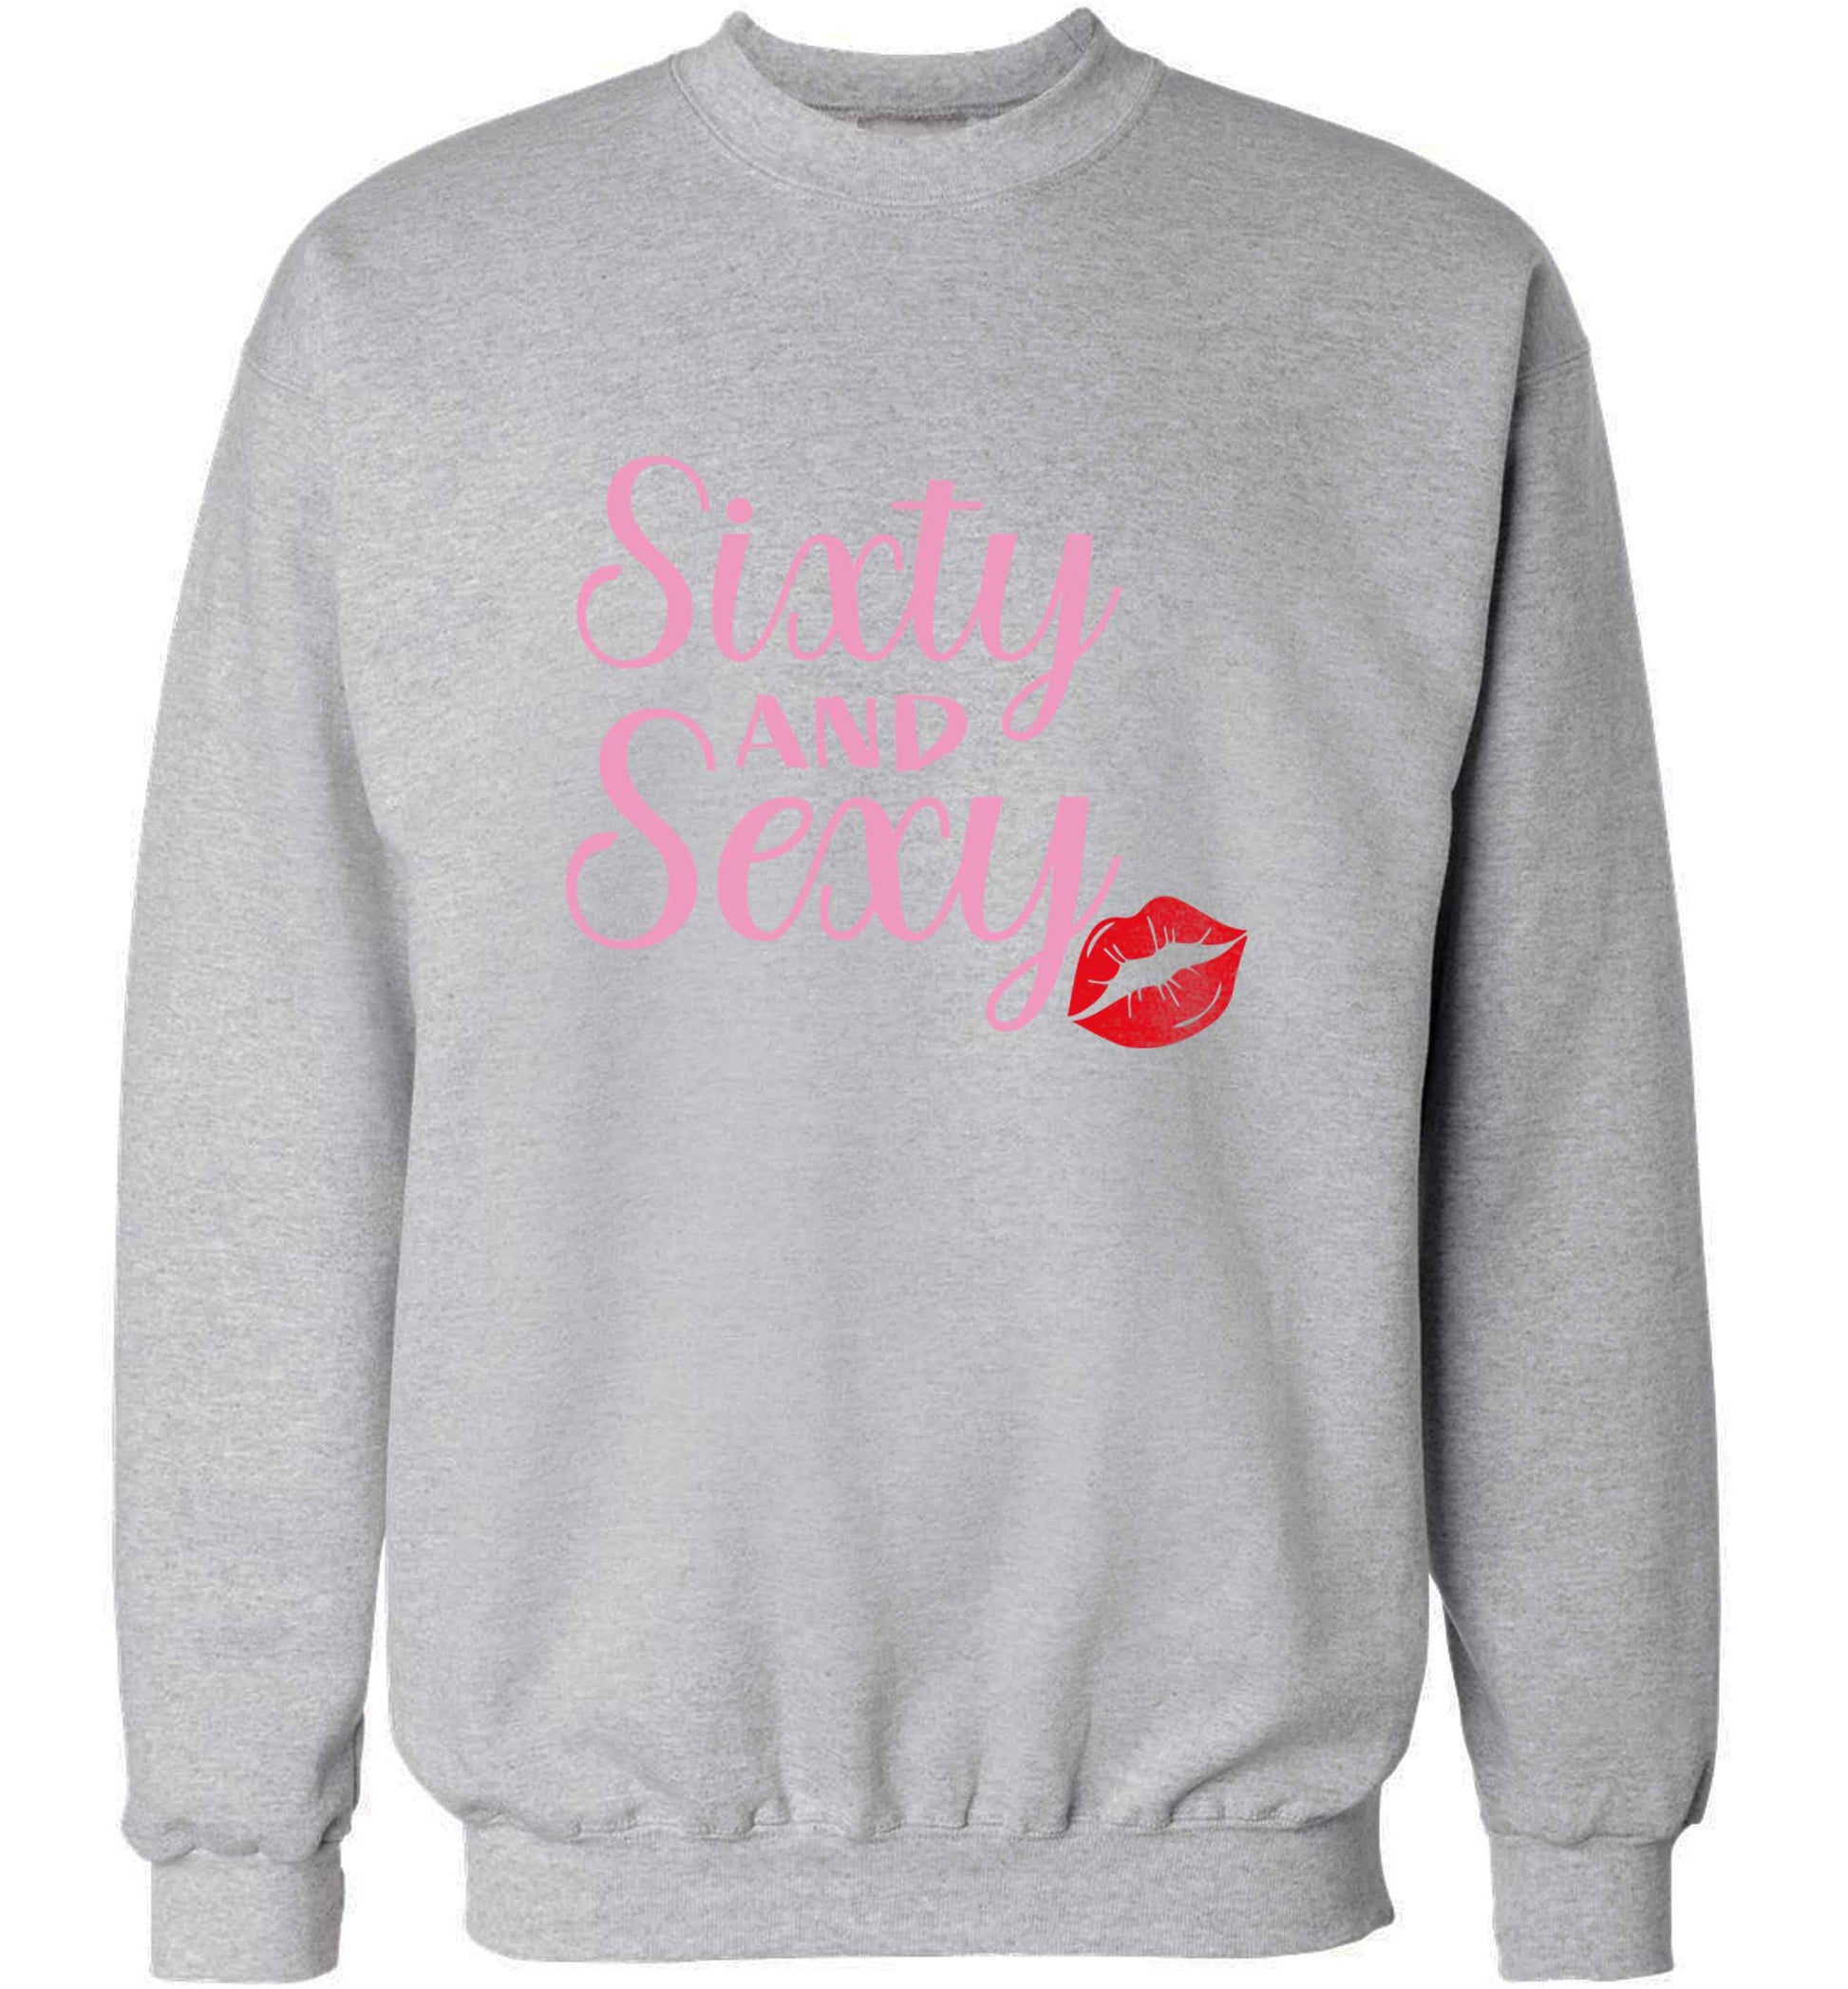 Sixty and sexy adult's unisex grey sweater 2XL